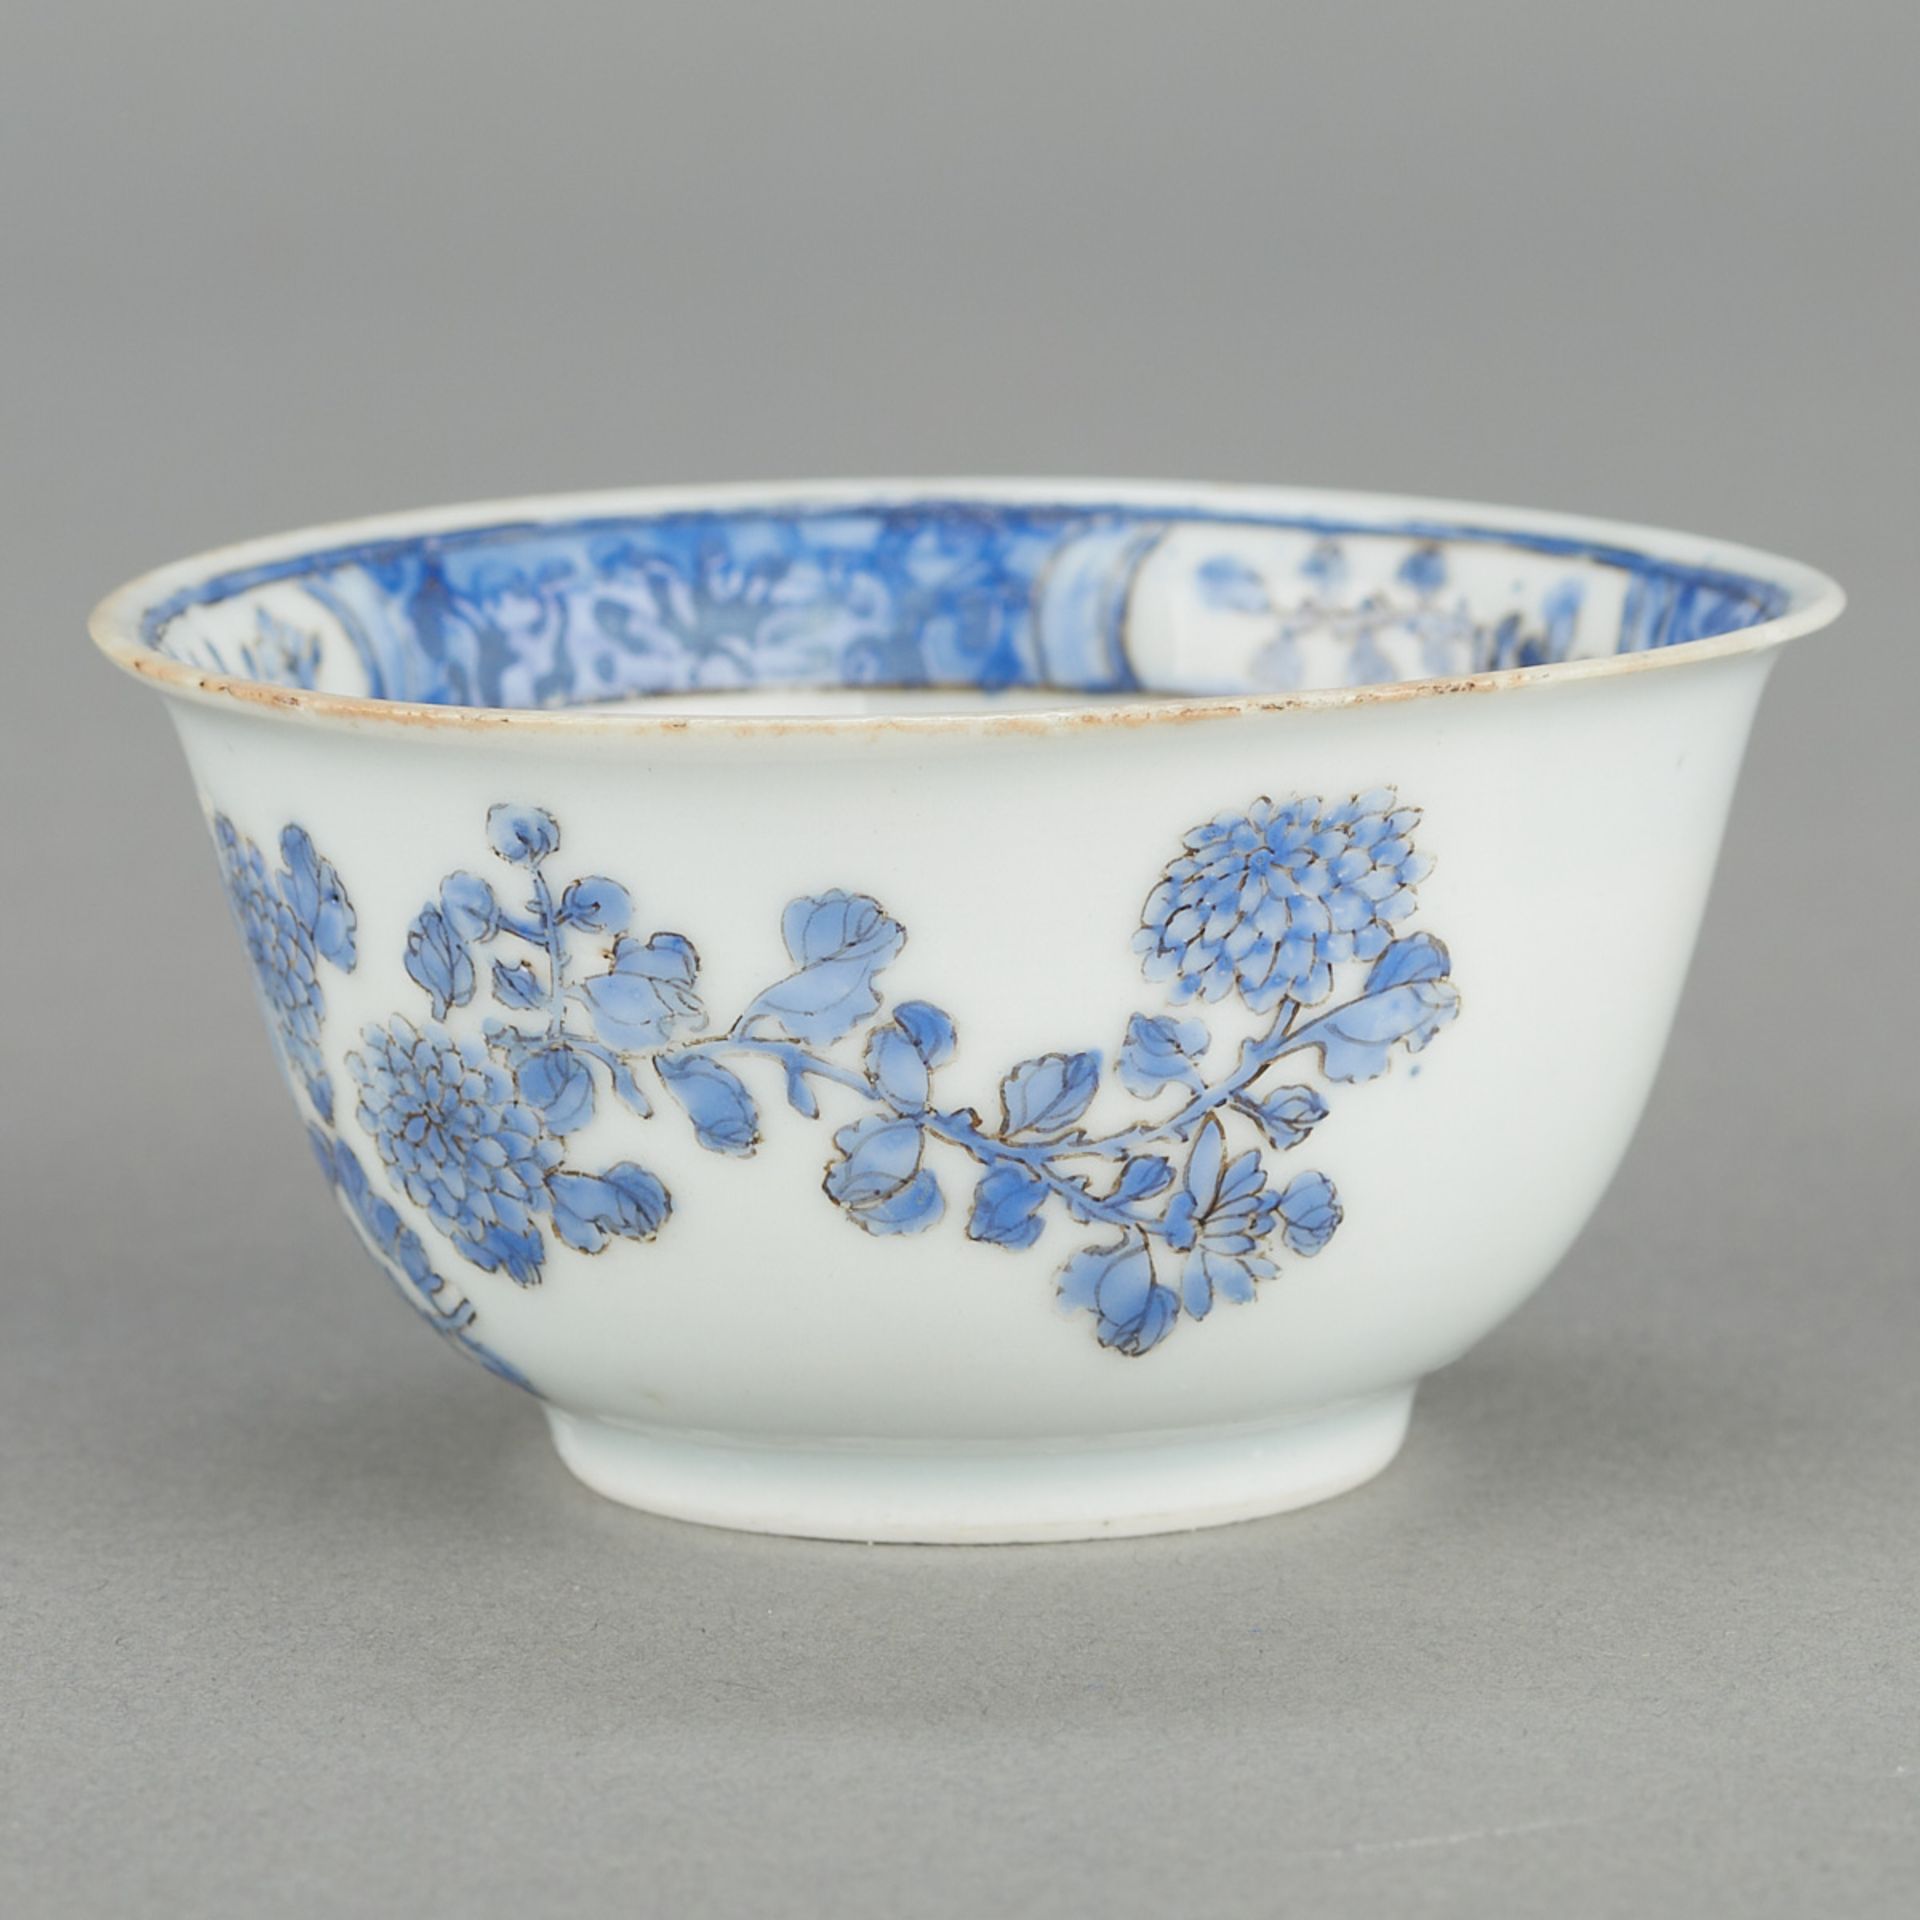 18th c. Chinese Porcelain Tea Bowl - Image 4 of 8